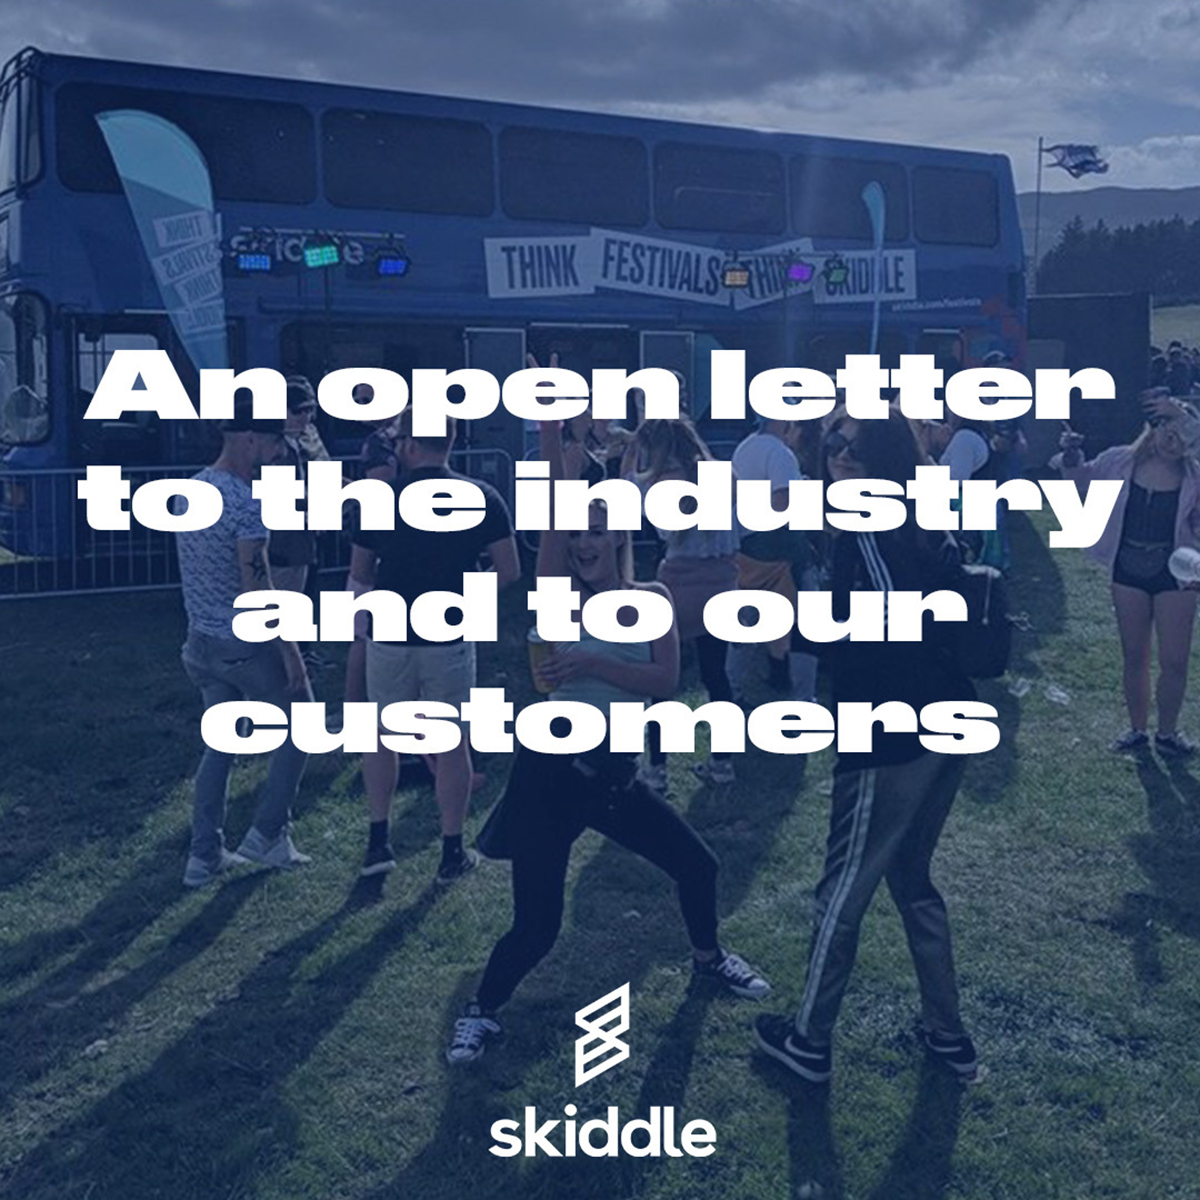 An Open letter from Skiddle